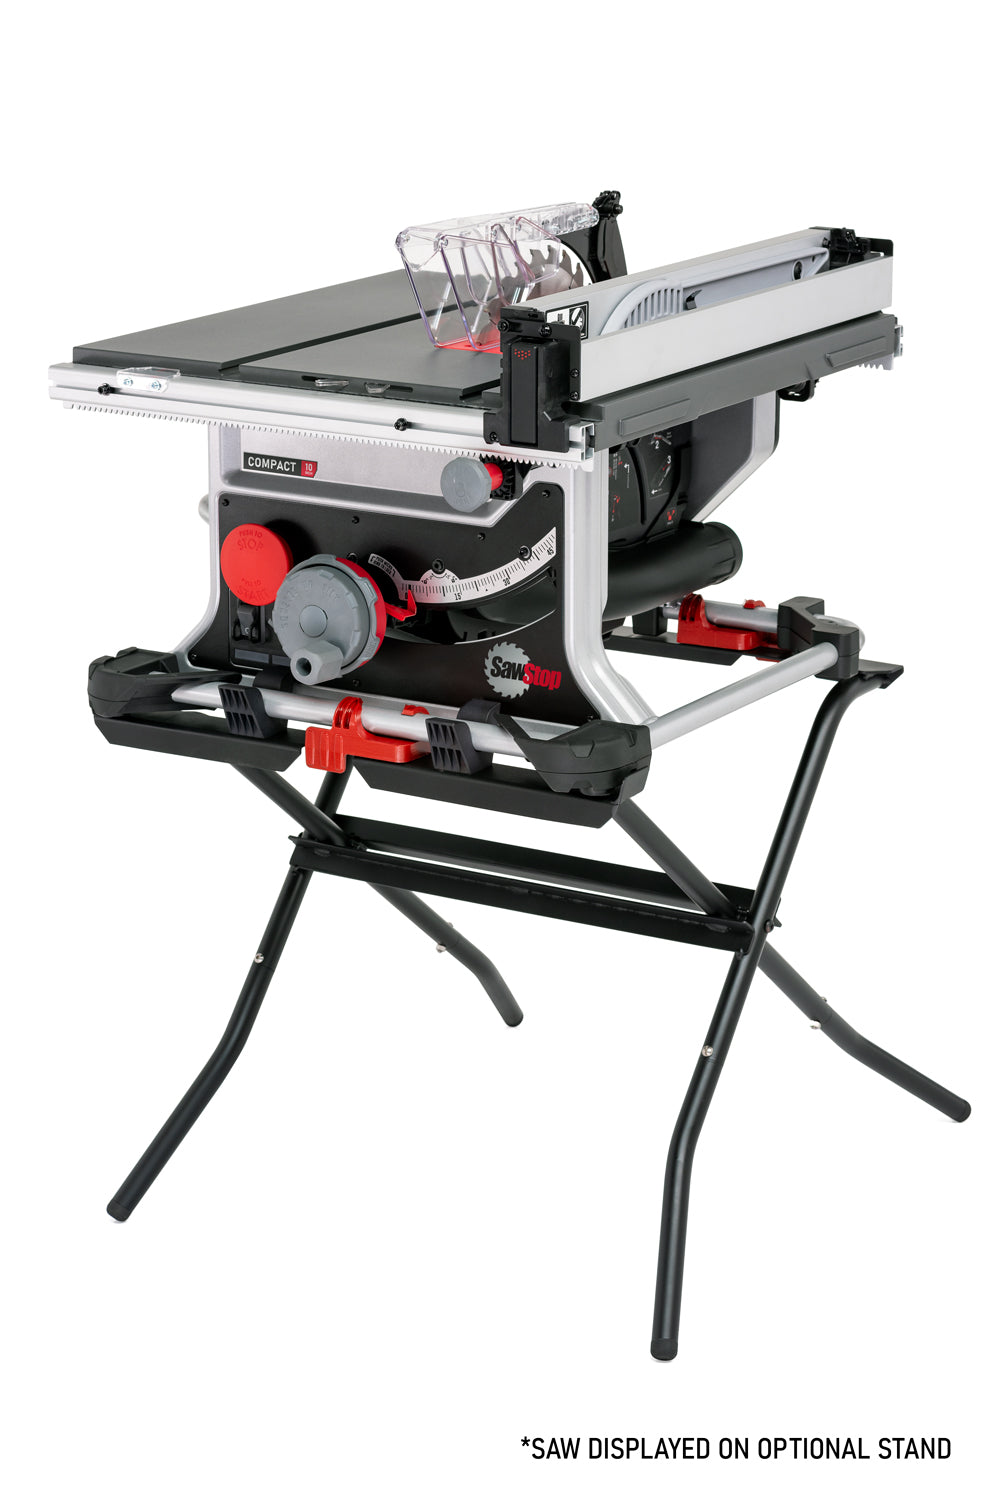 Compact Table Saw CTS-120A60